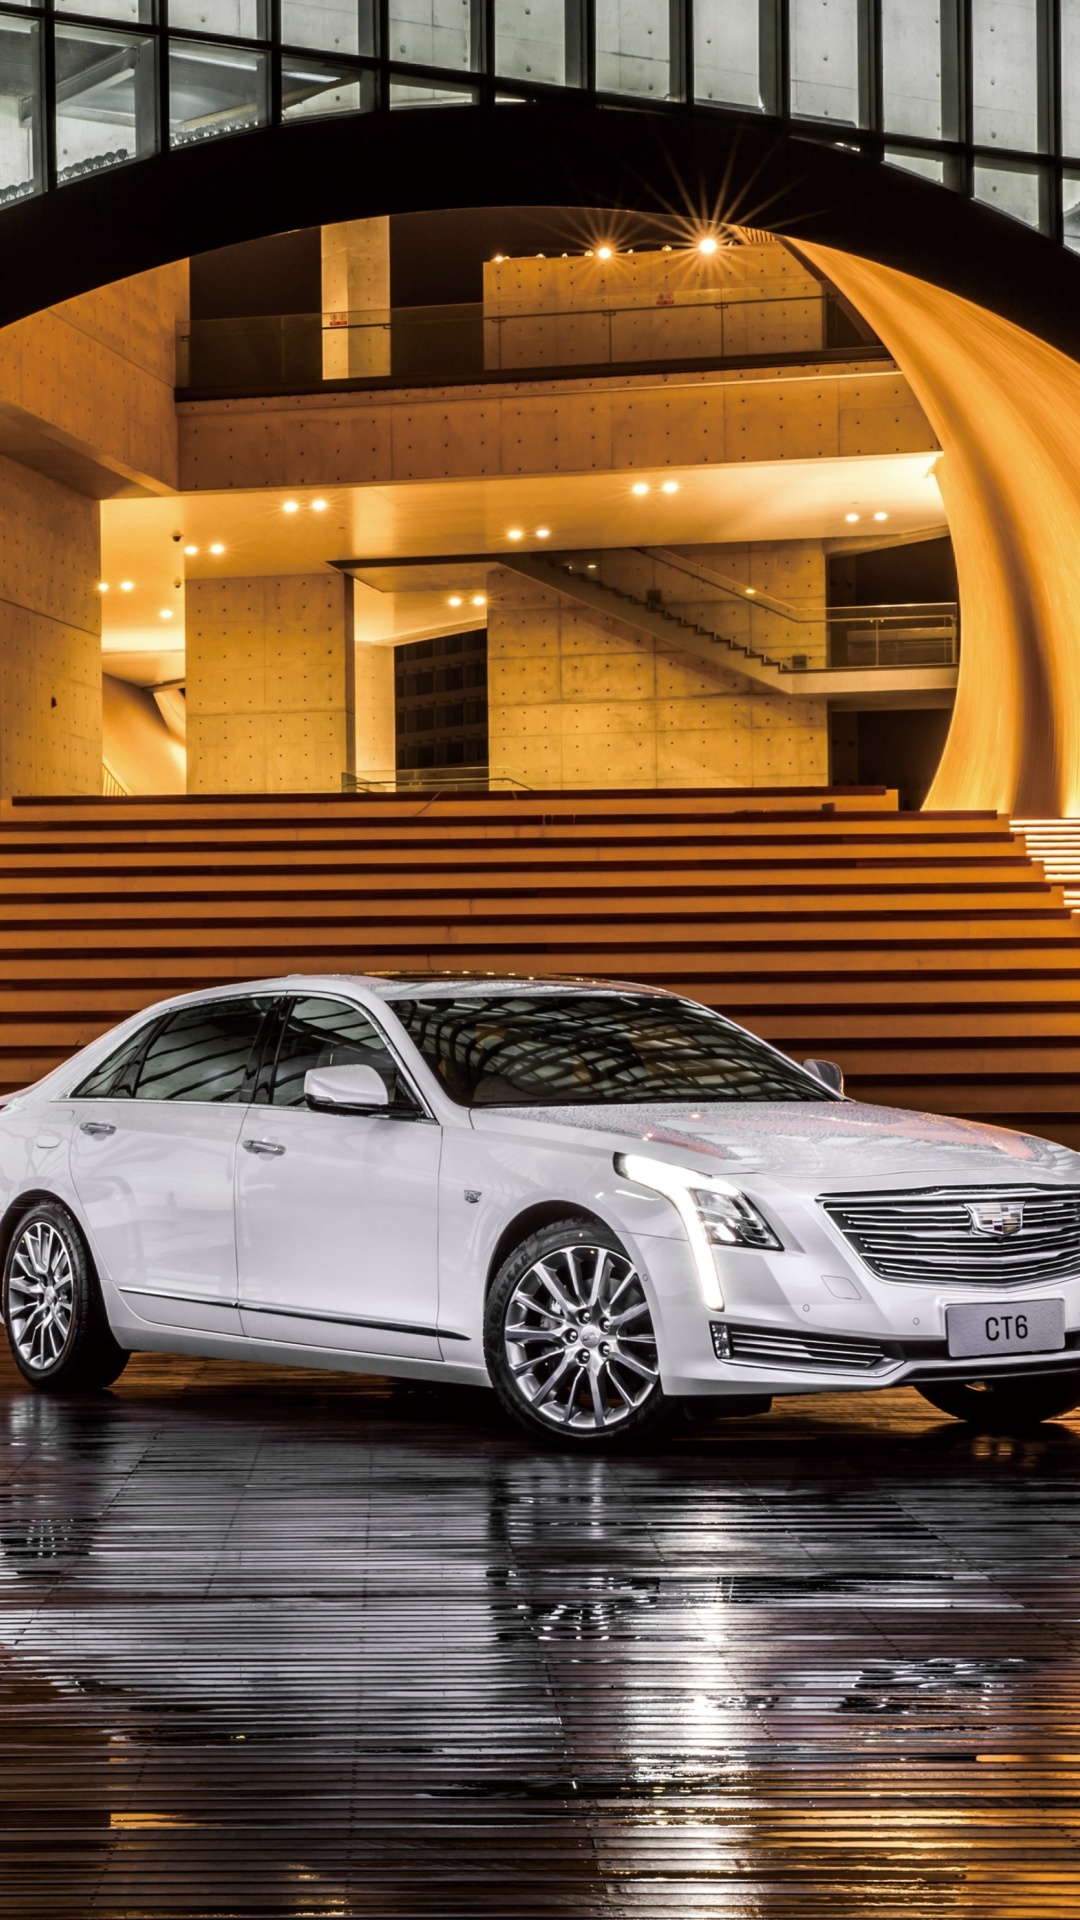 Cadillac CT6 on Auto Show wallpaper 1080x1920